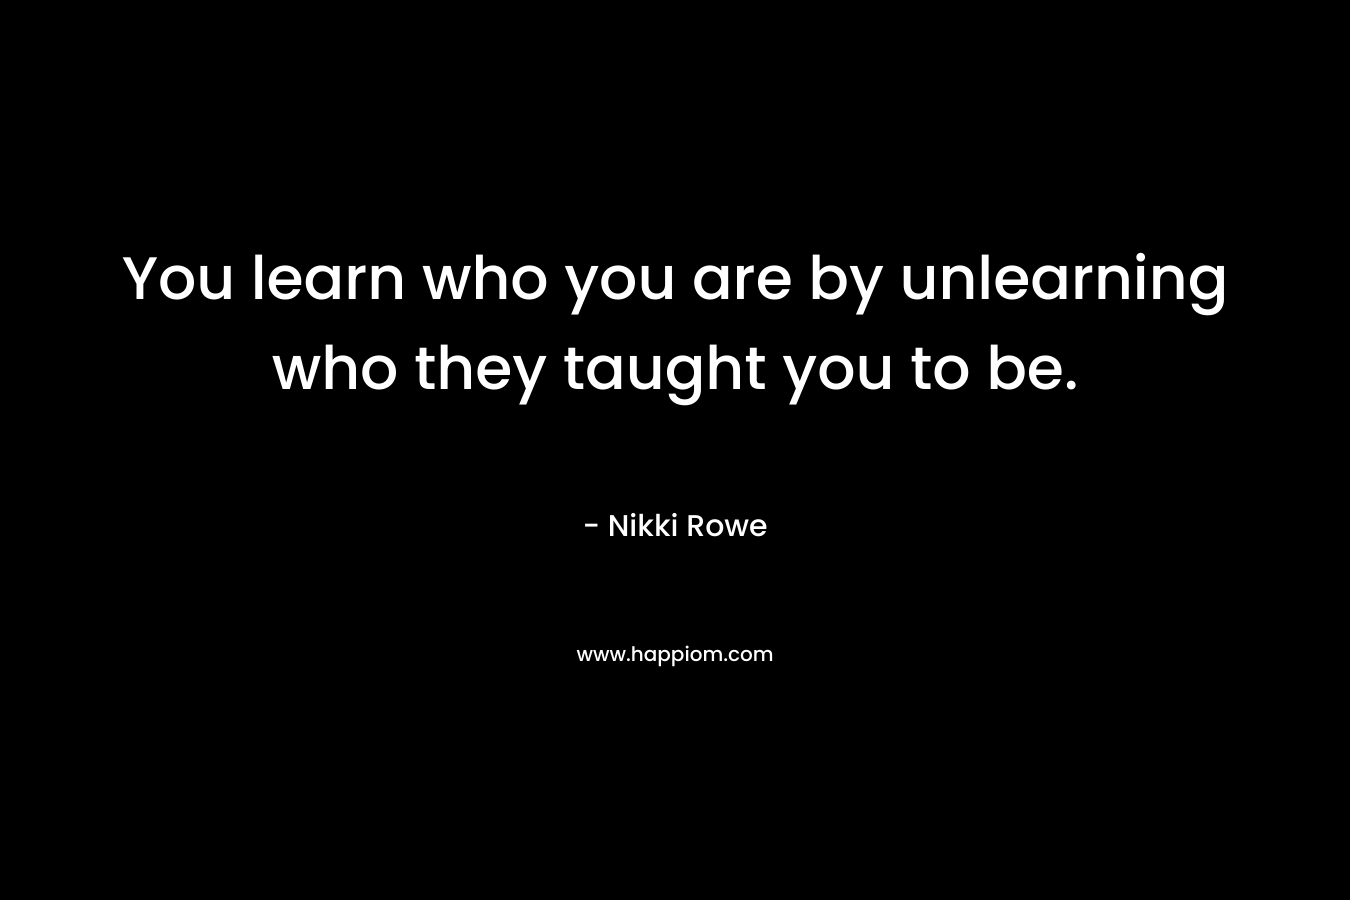 You learn who you are by unlearning who they taught you to be. – Nikki Rowe